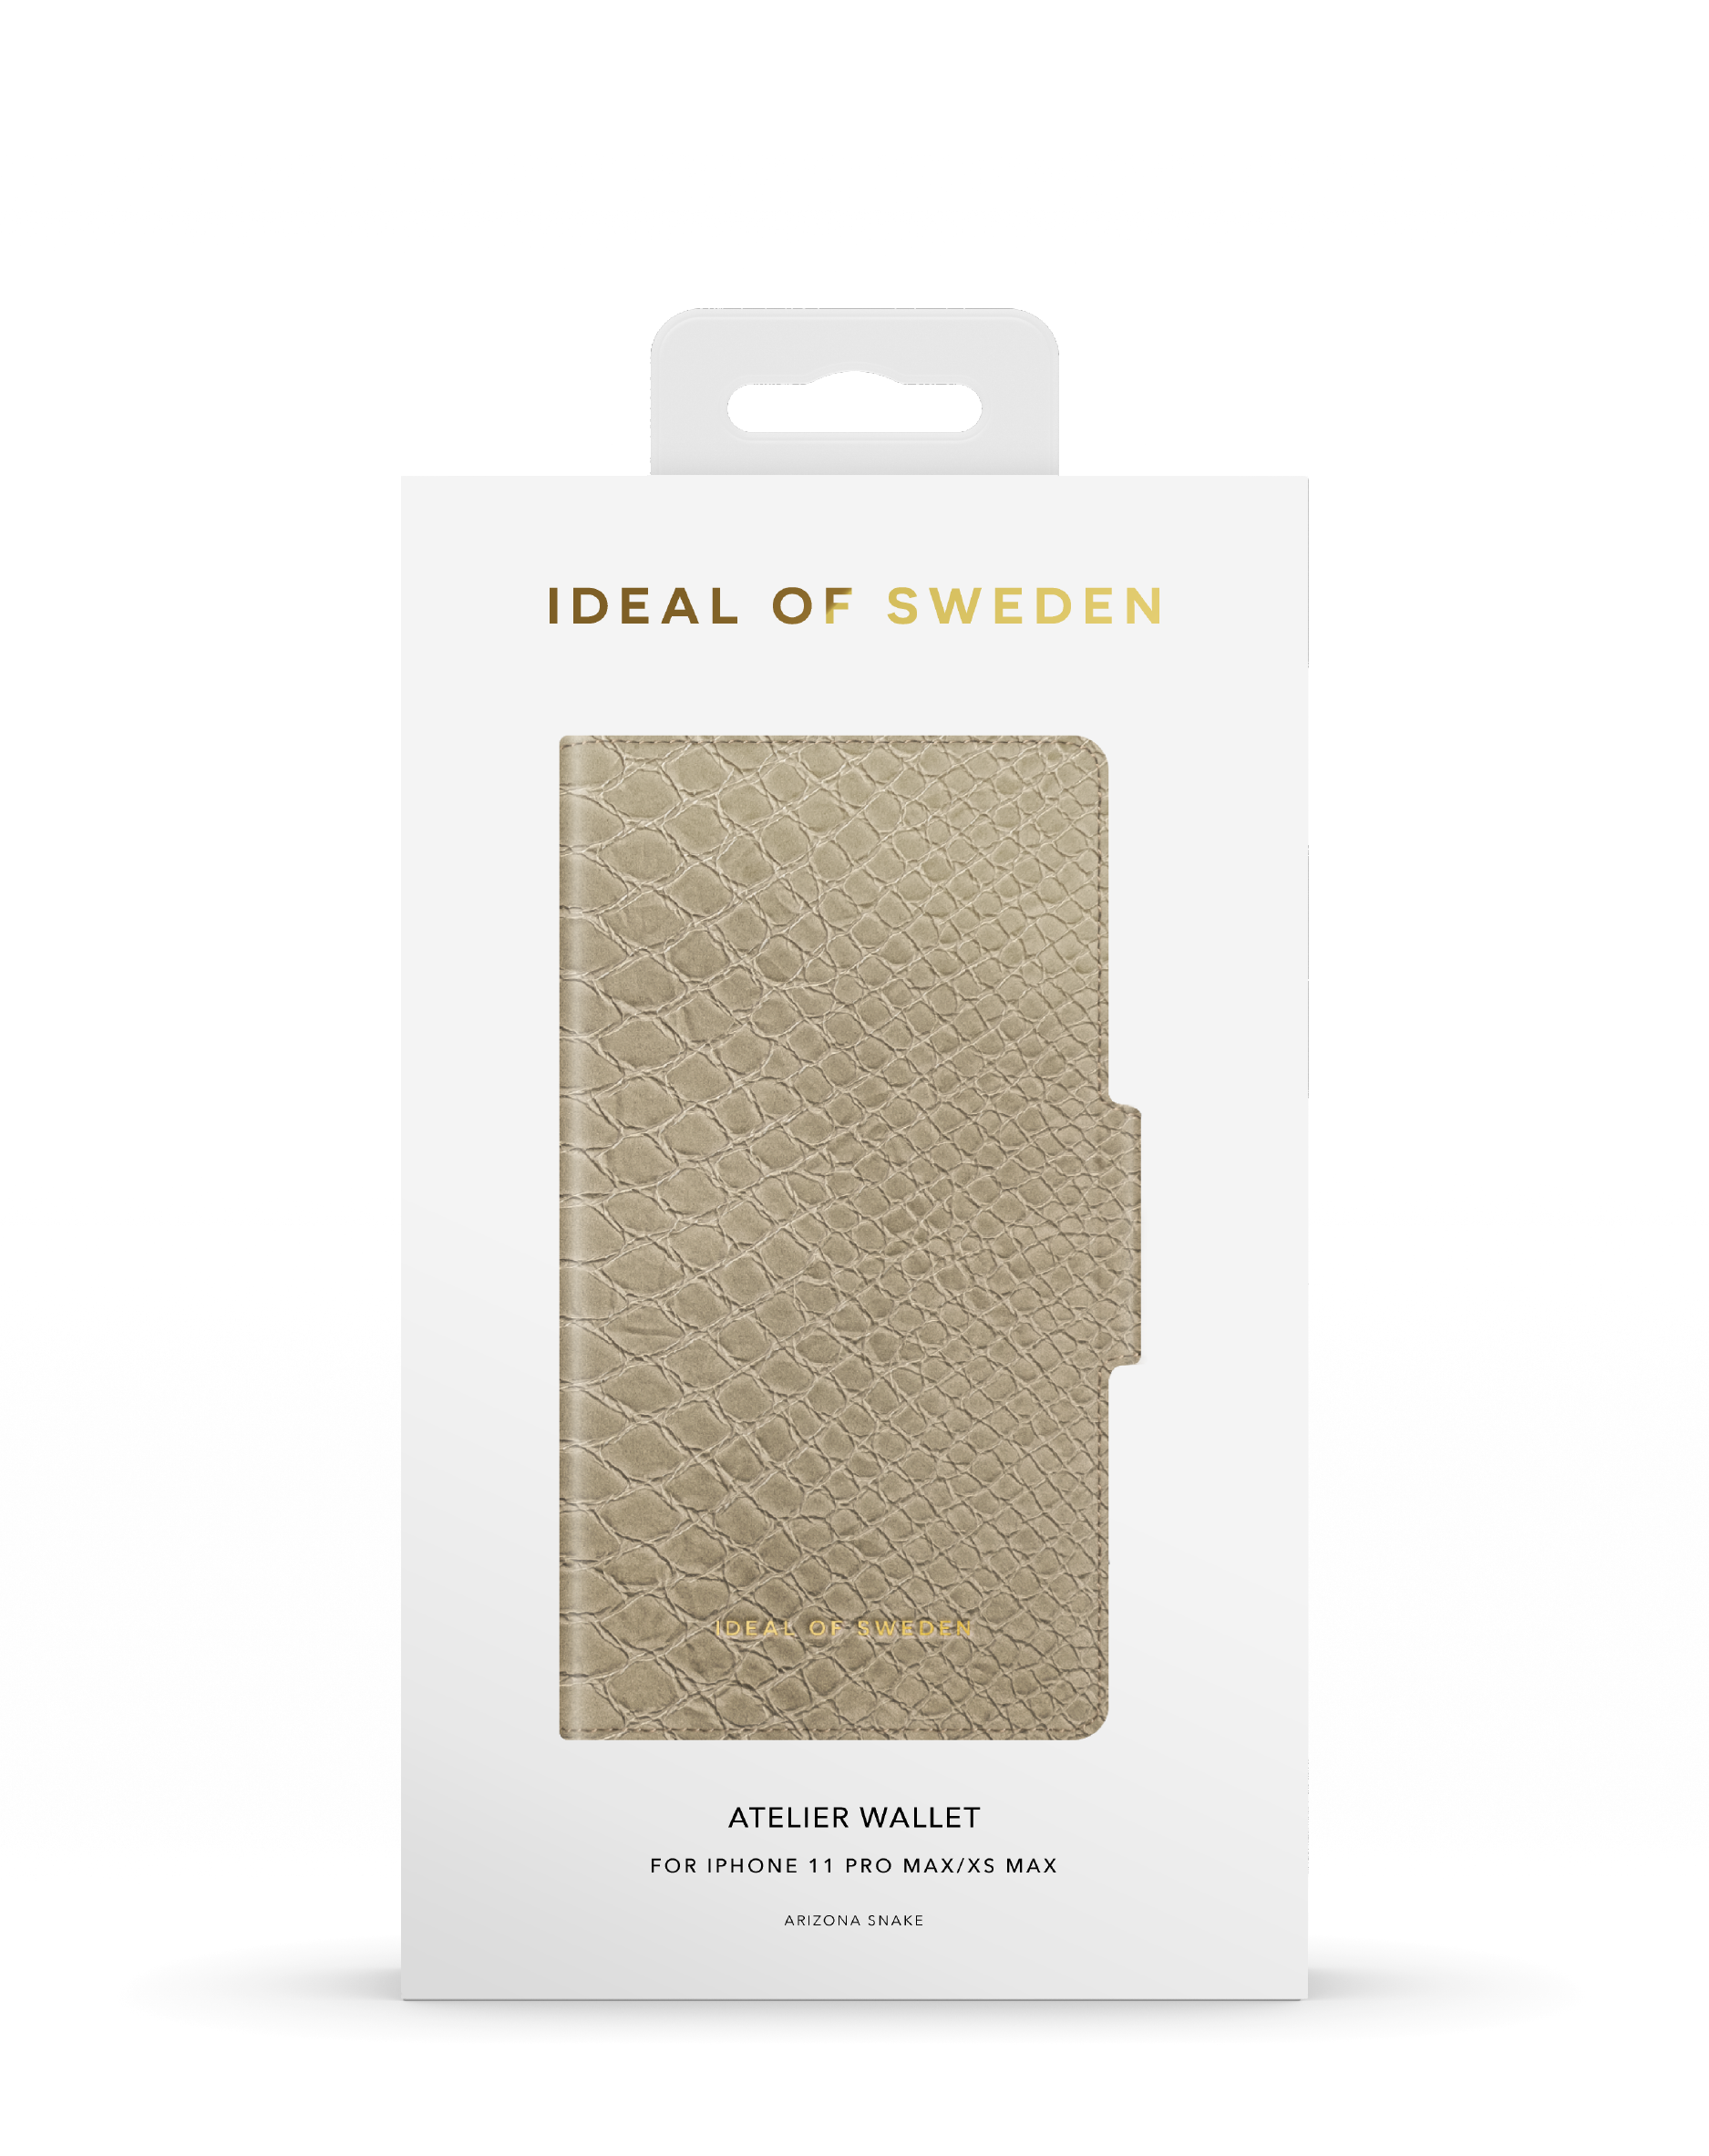 IDEAL OF SWEDEN IDAW-I1965-225, Pro iPhone Snake Apple, Arizona Apple Apple Max, Max, iPhone 11 Bookcover, XS